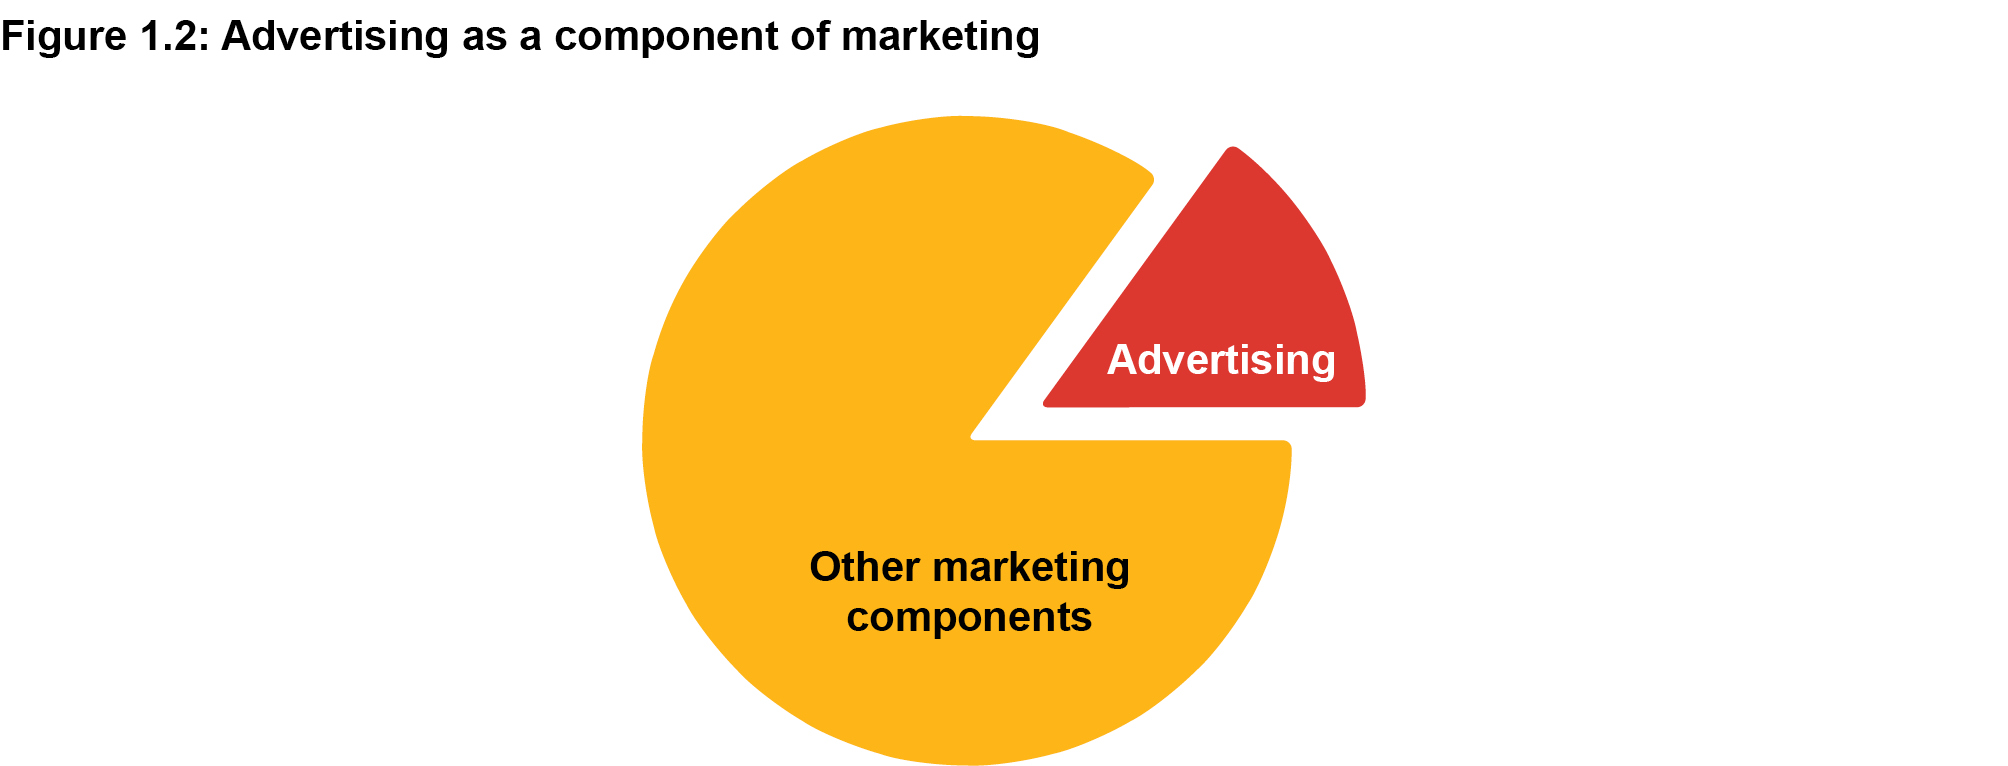 advertising as a component of marketing